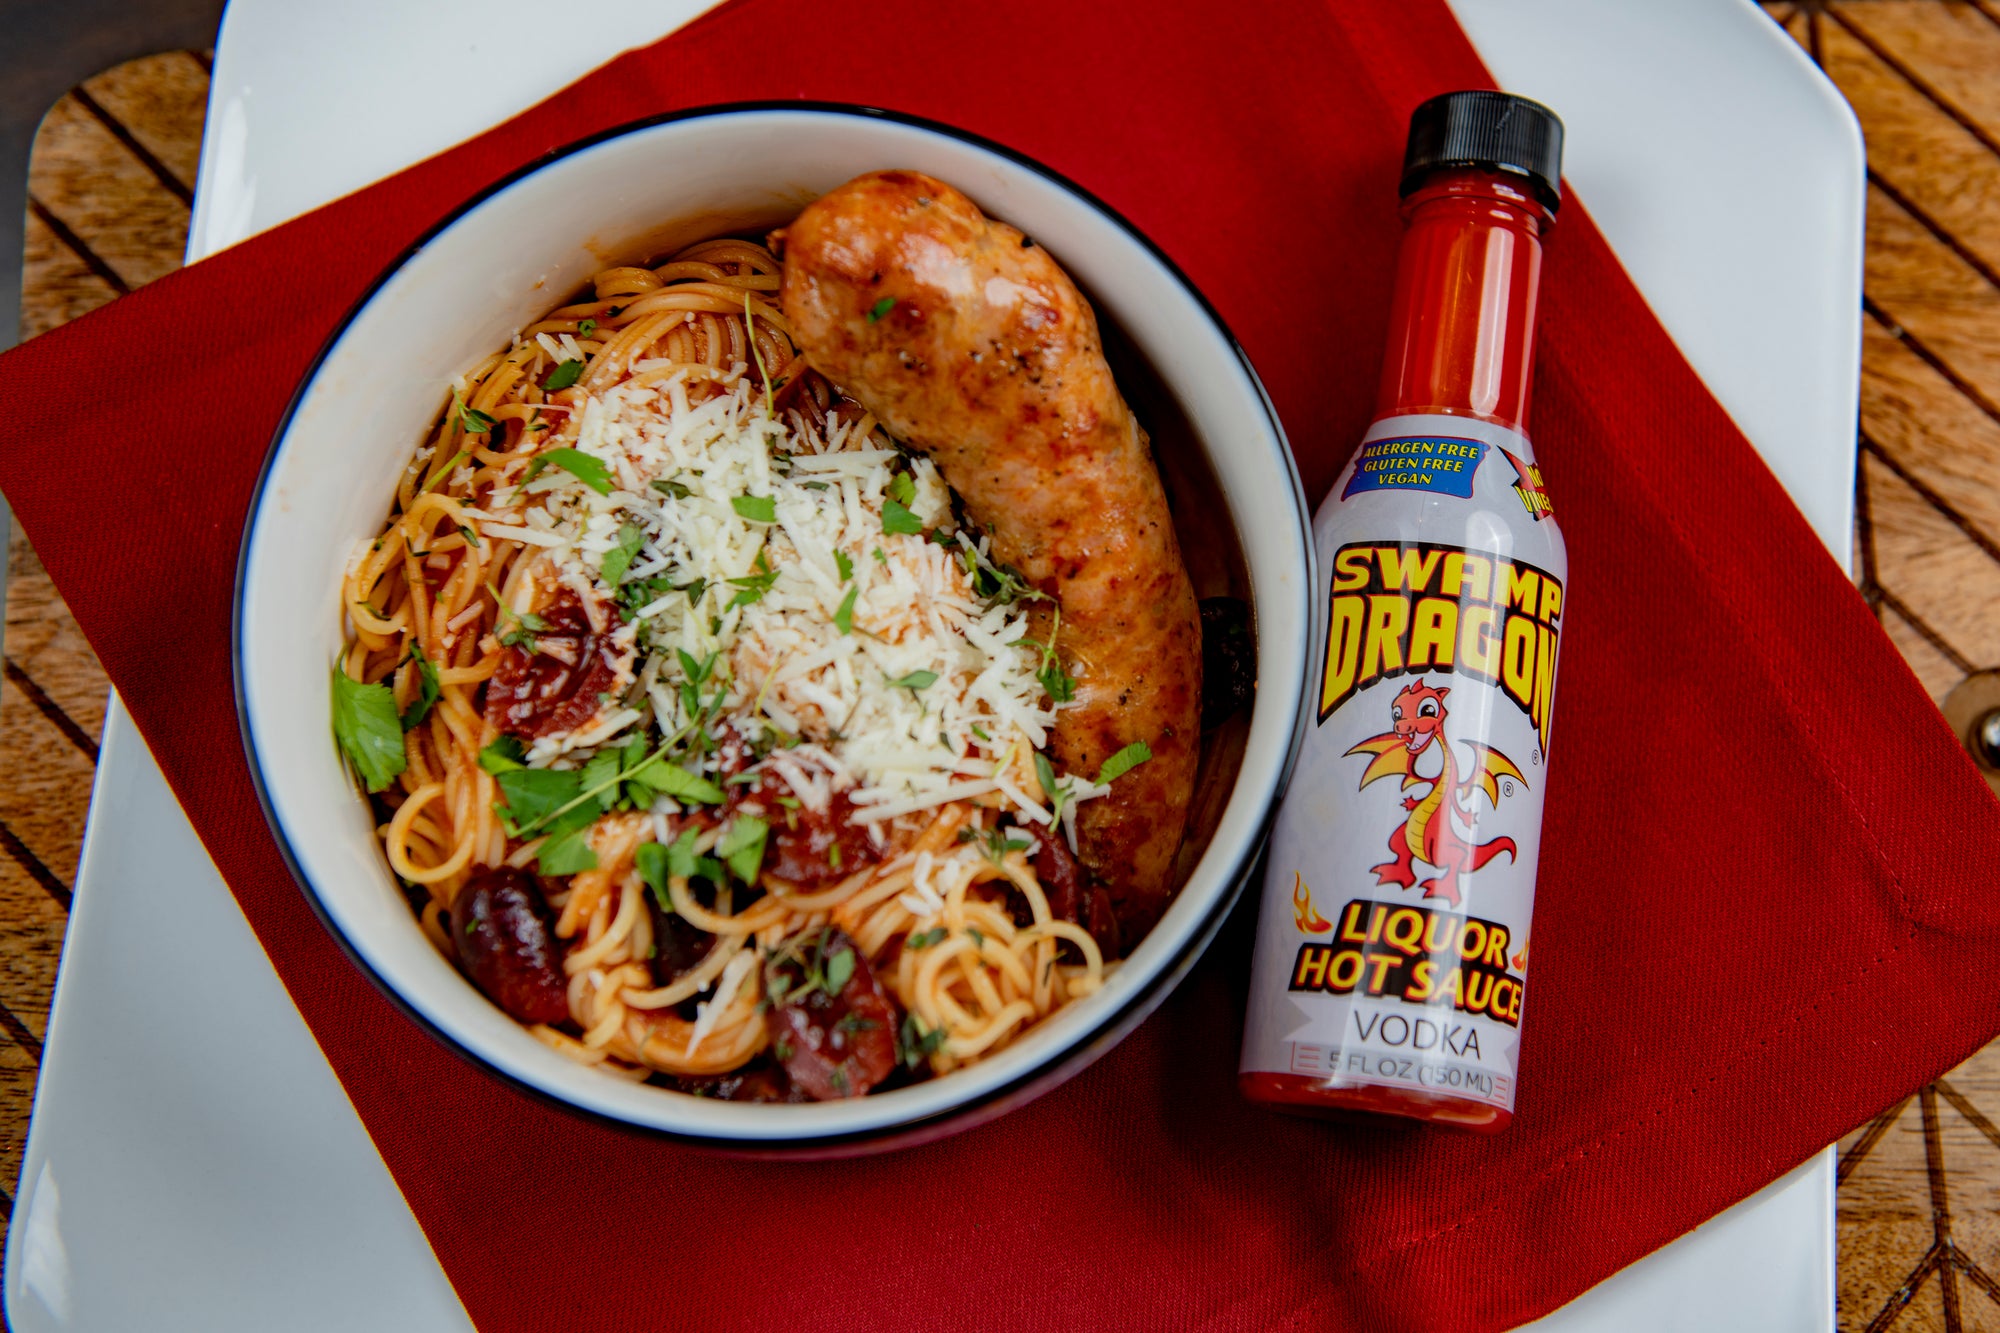 Bowl of spaghetti with red sauce, a link of italian sausage, and shredded parmesan cheese. A 5 ounce bottle of Swamp Dragon "Vodka Dragon Hot Sauce" sits next to the bowl.